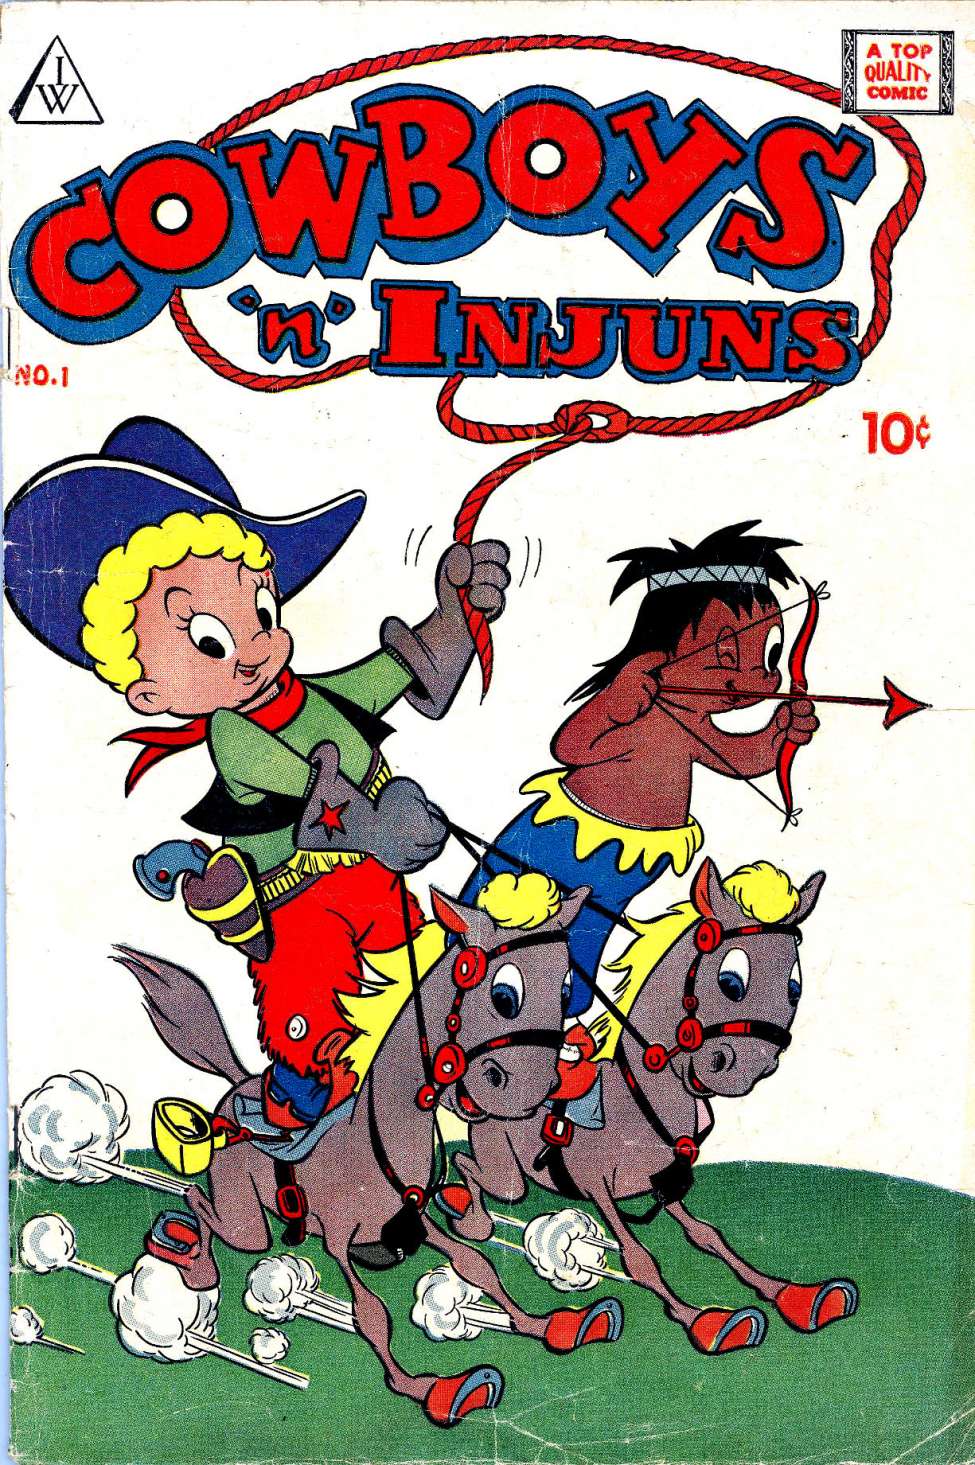 Book Cover For Cowboys 'N' Injuns 1